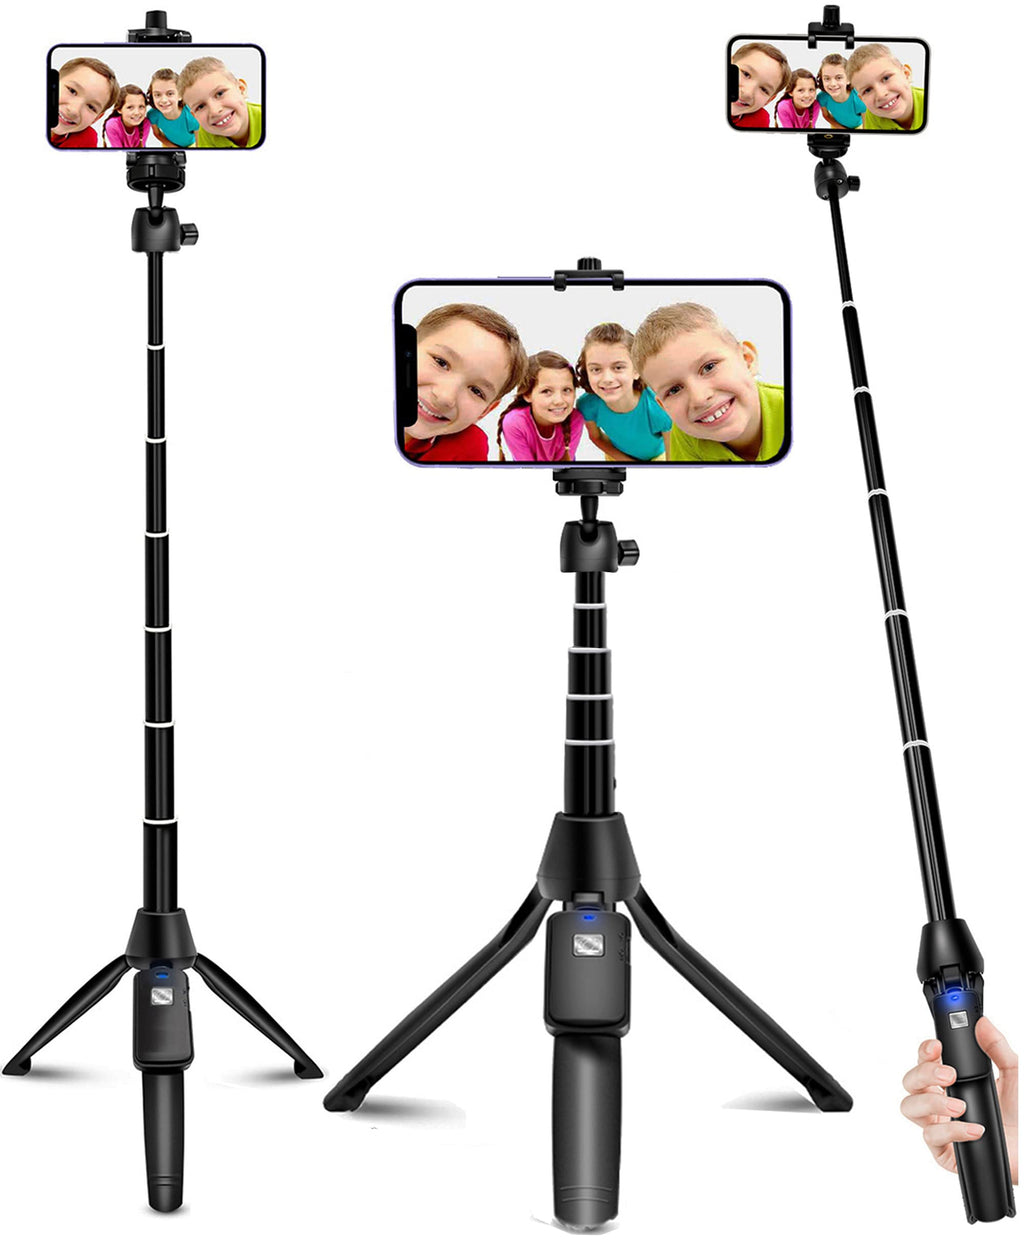  [AUSTRALIA] - Selfie Stick, 40 inch Extendable Selfie Stick Tripod,Phone Tripod with Wireless Remote Shutter,Group Selfies/Live Streaming/Video Recording Compatible with All Cellphones